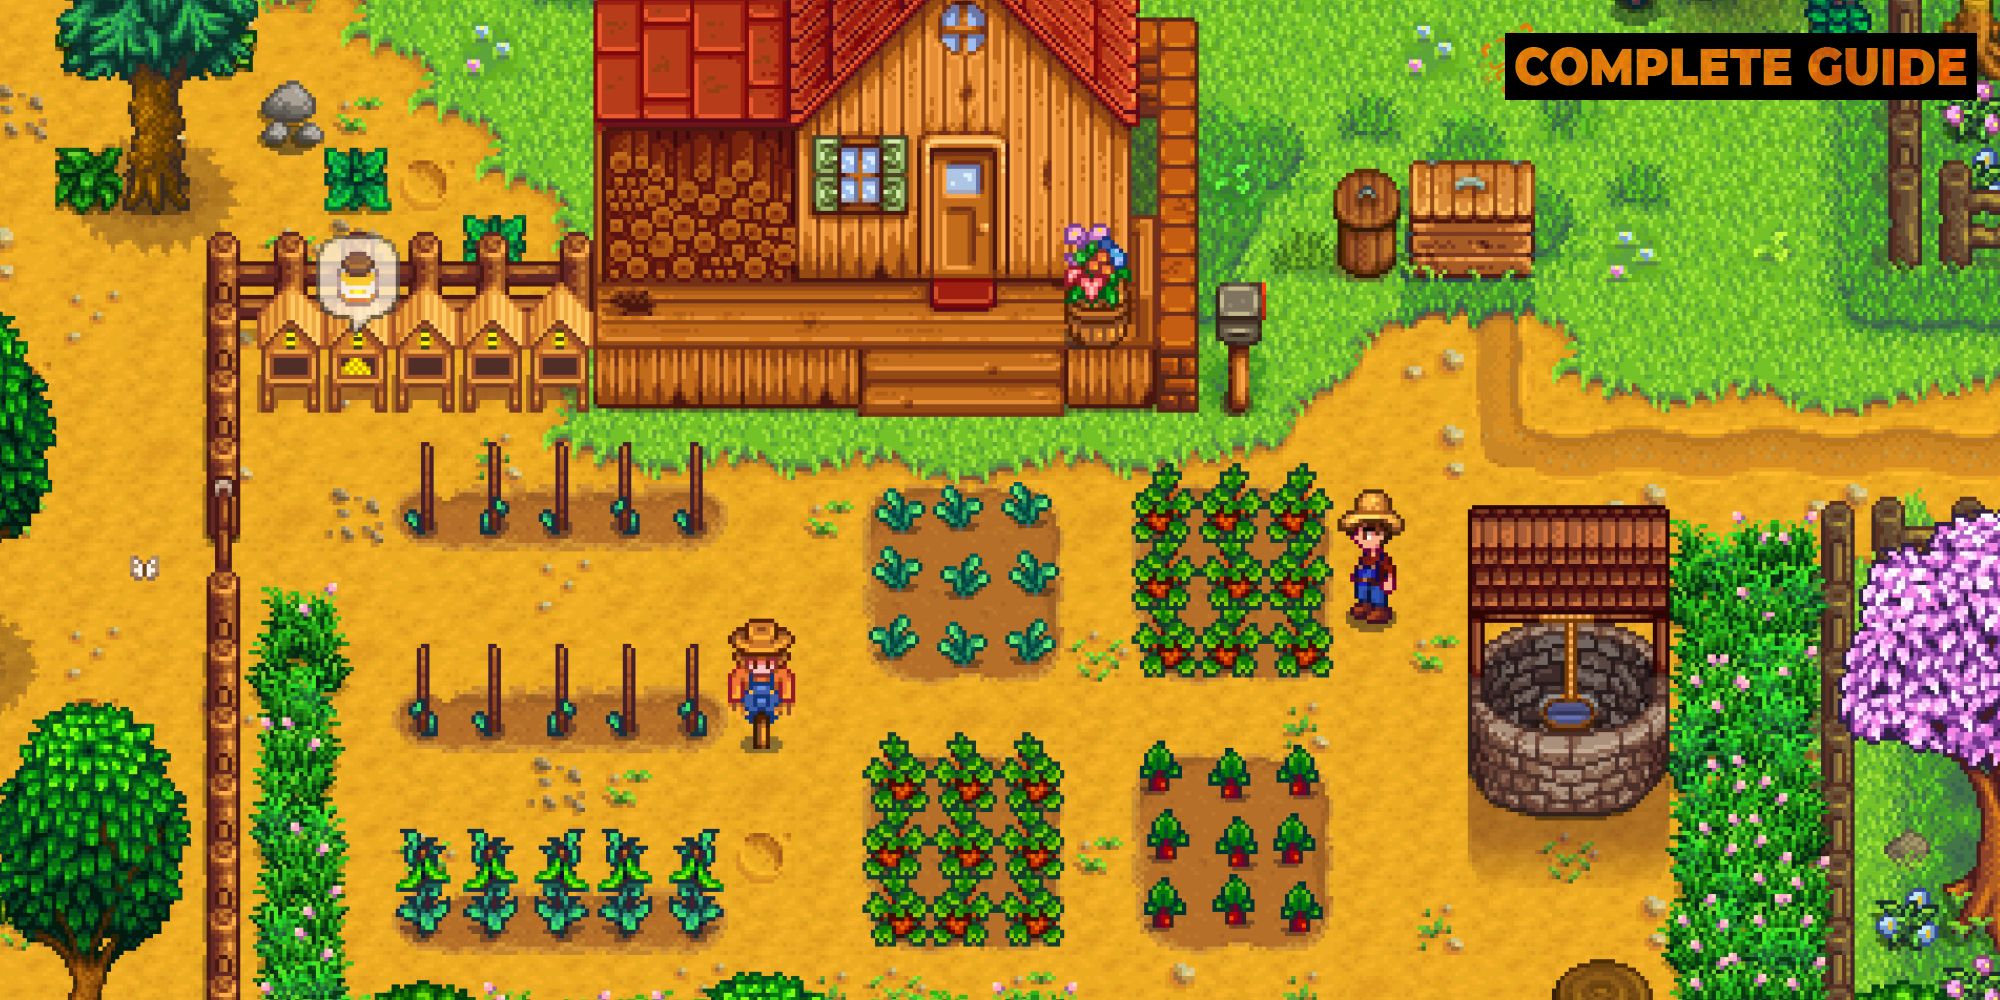 Stardew Valley: Complete Guide